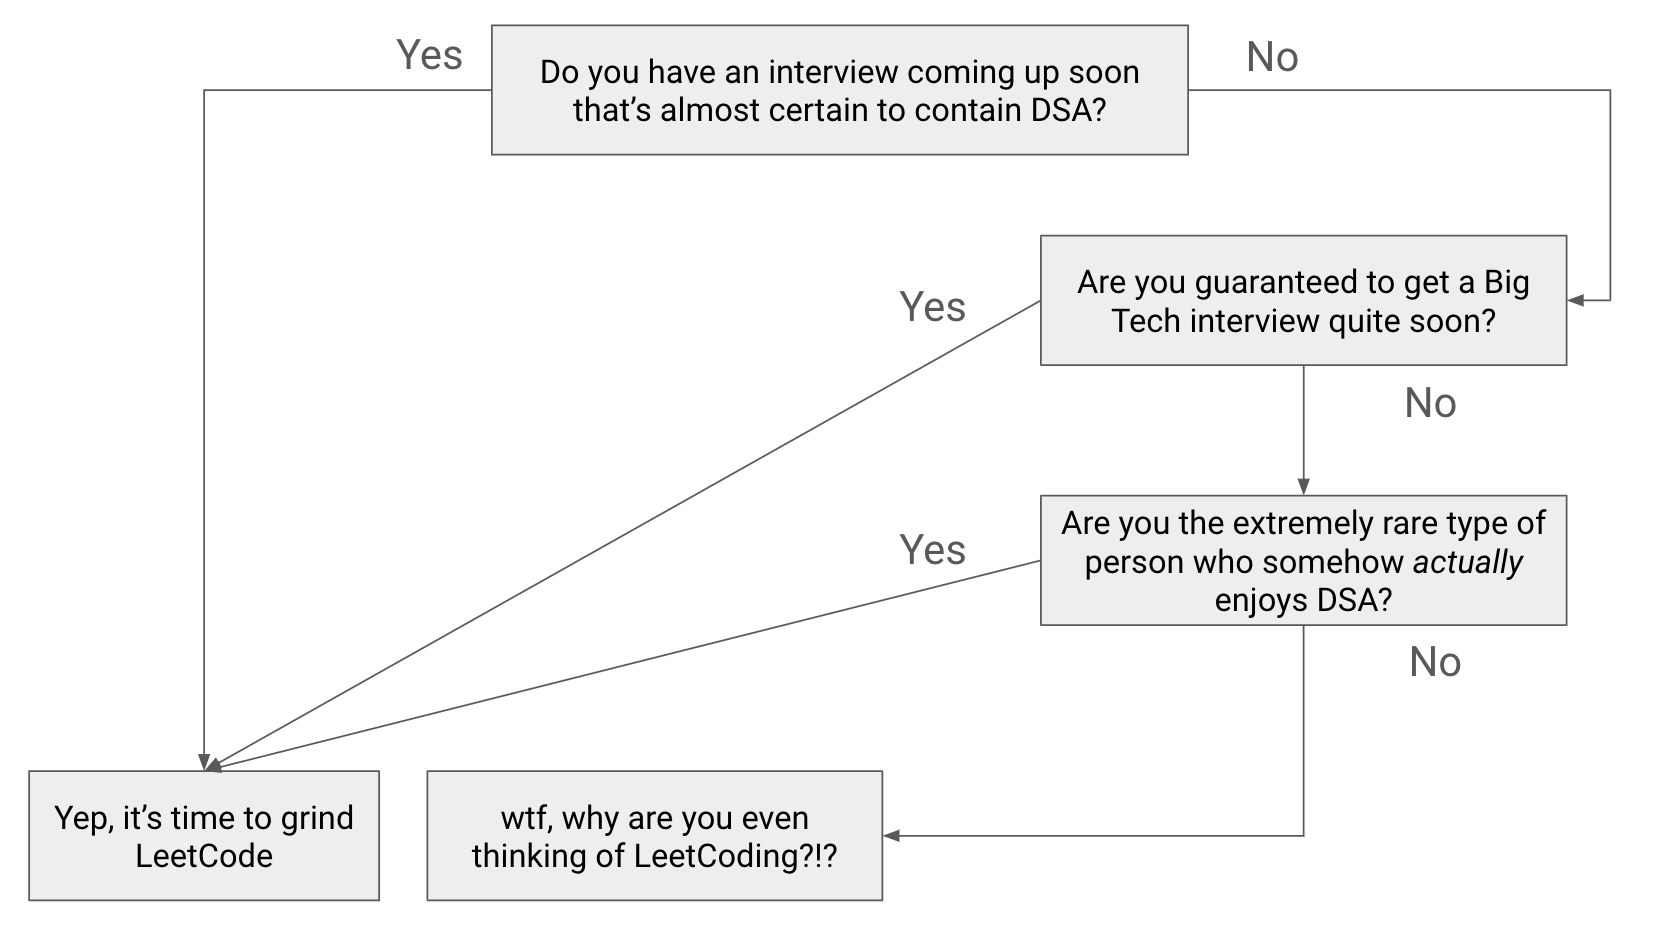 Ace Your Tech Interview As A Software Engineer [Part 28] - How Much LeetCode Should I Grind?